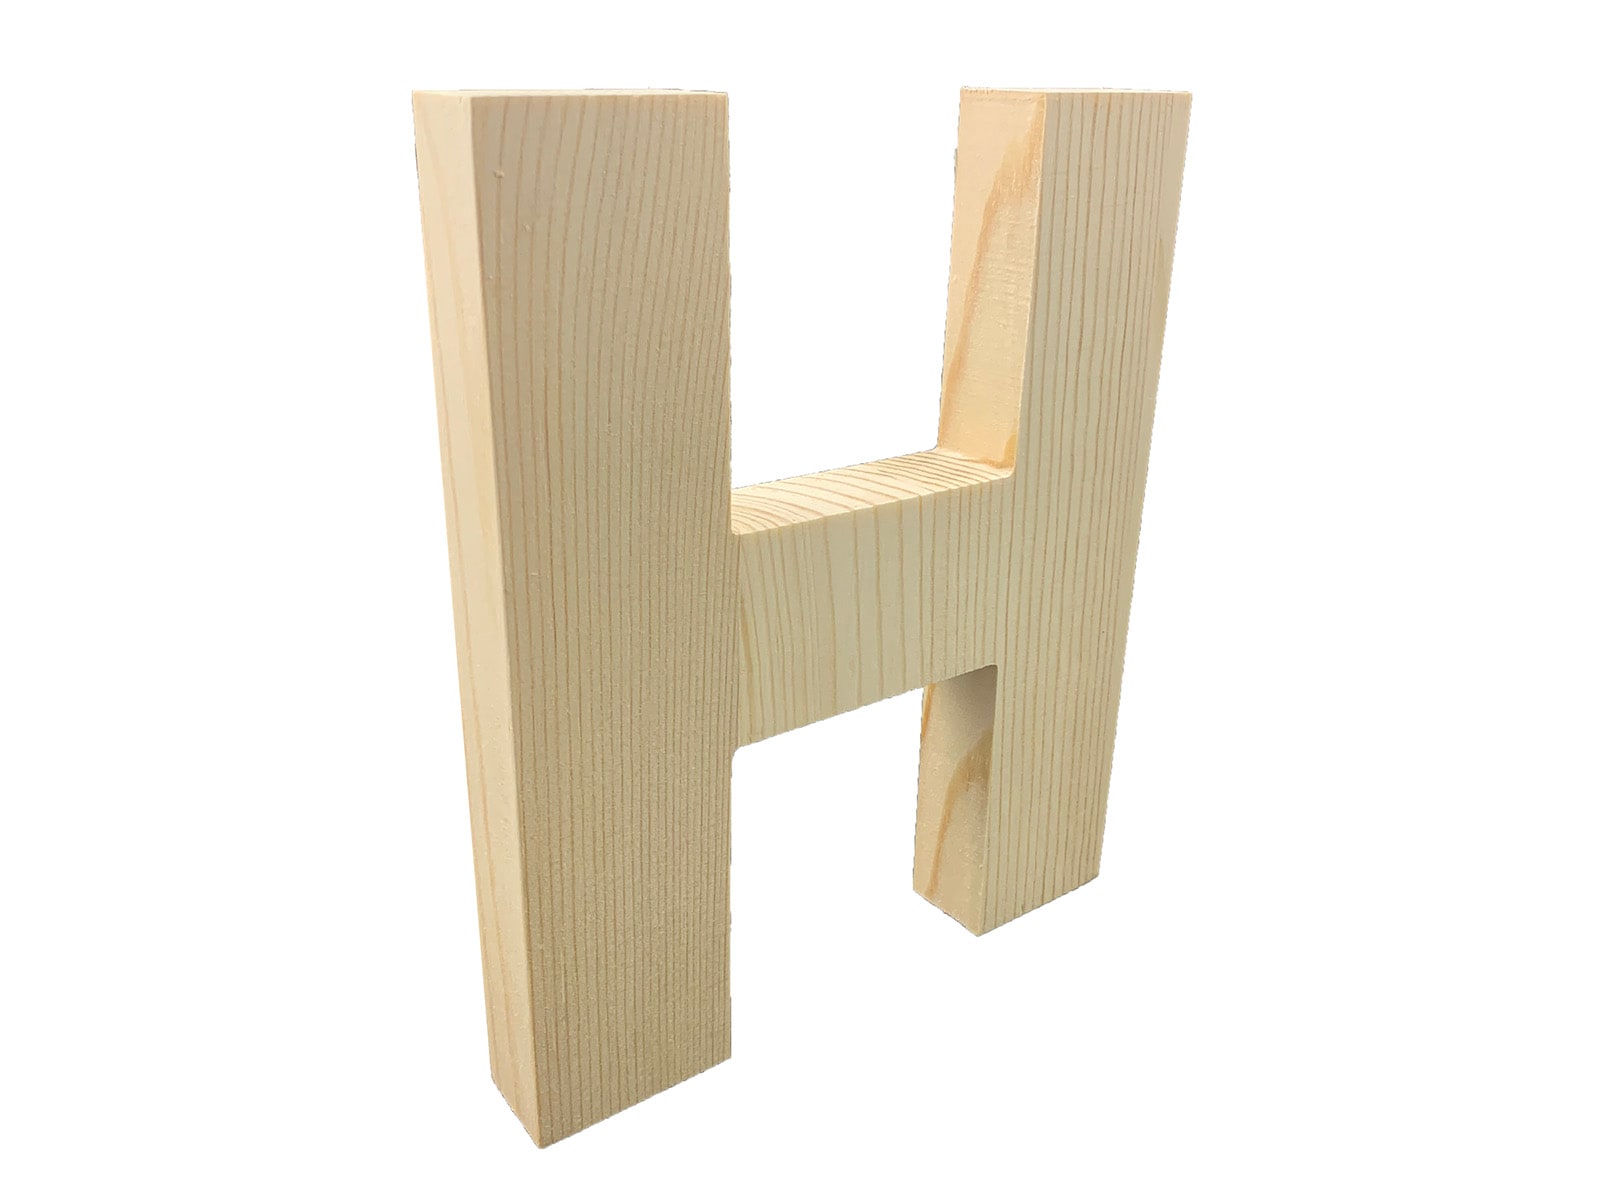 4 inch Wooden Letter A - Cut from Baltic Birch Plywood, This 4 inch Wood Letter Is Ready for Painting or Decorating. for Home Decor, Office Signs